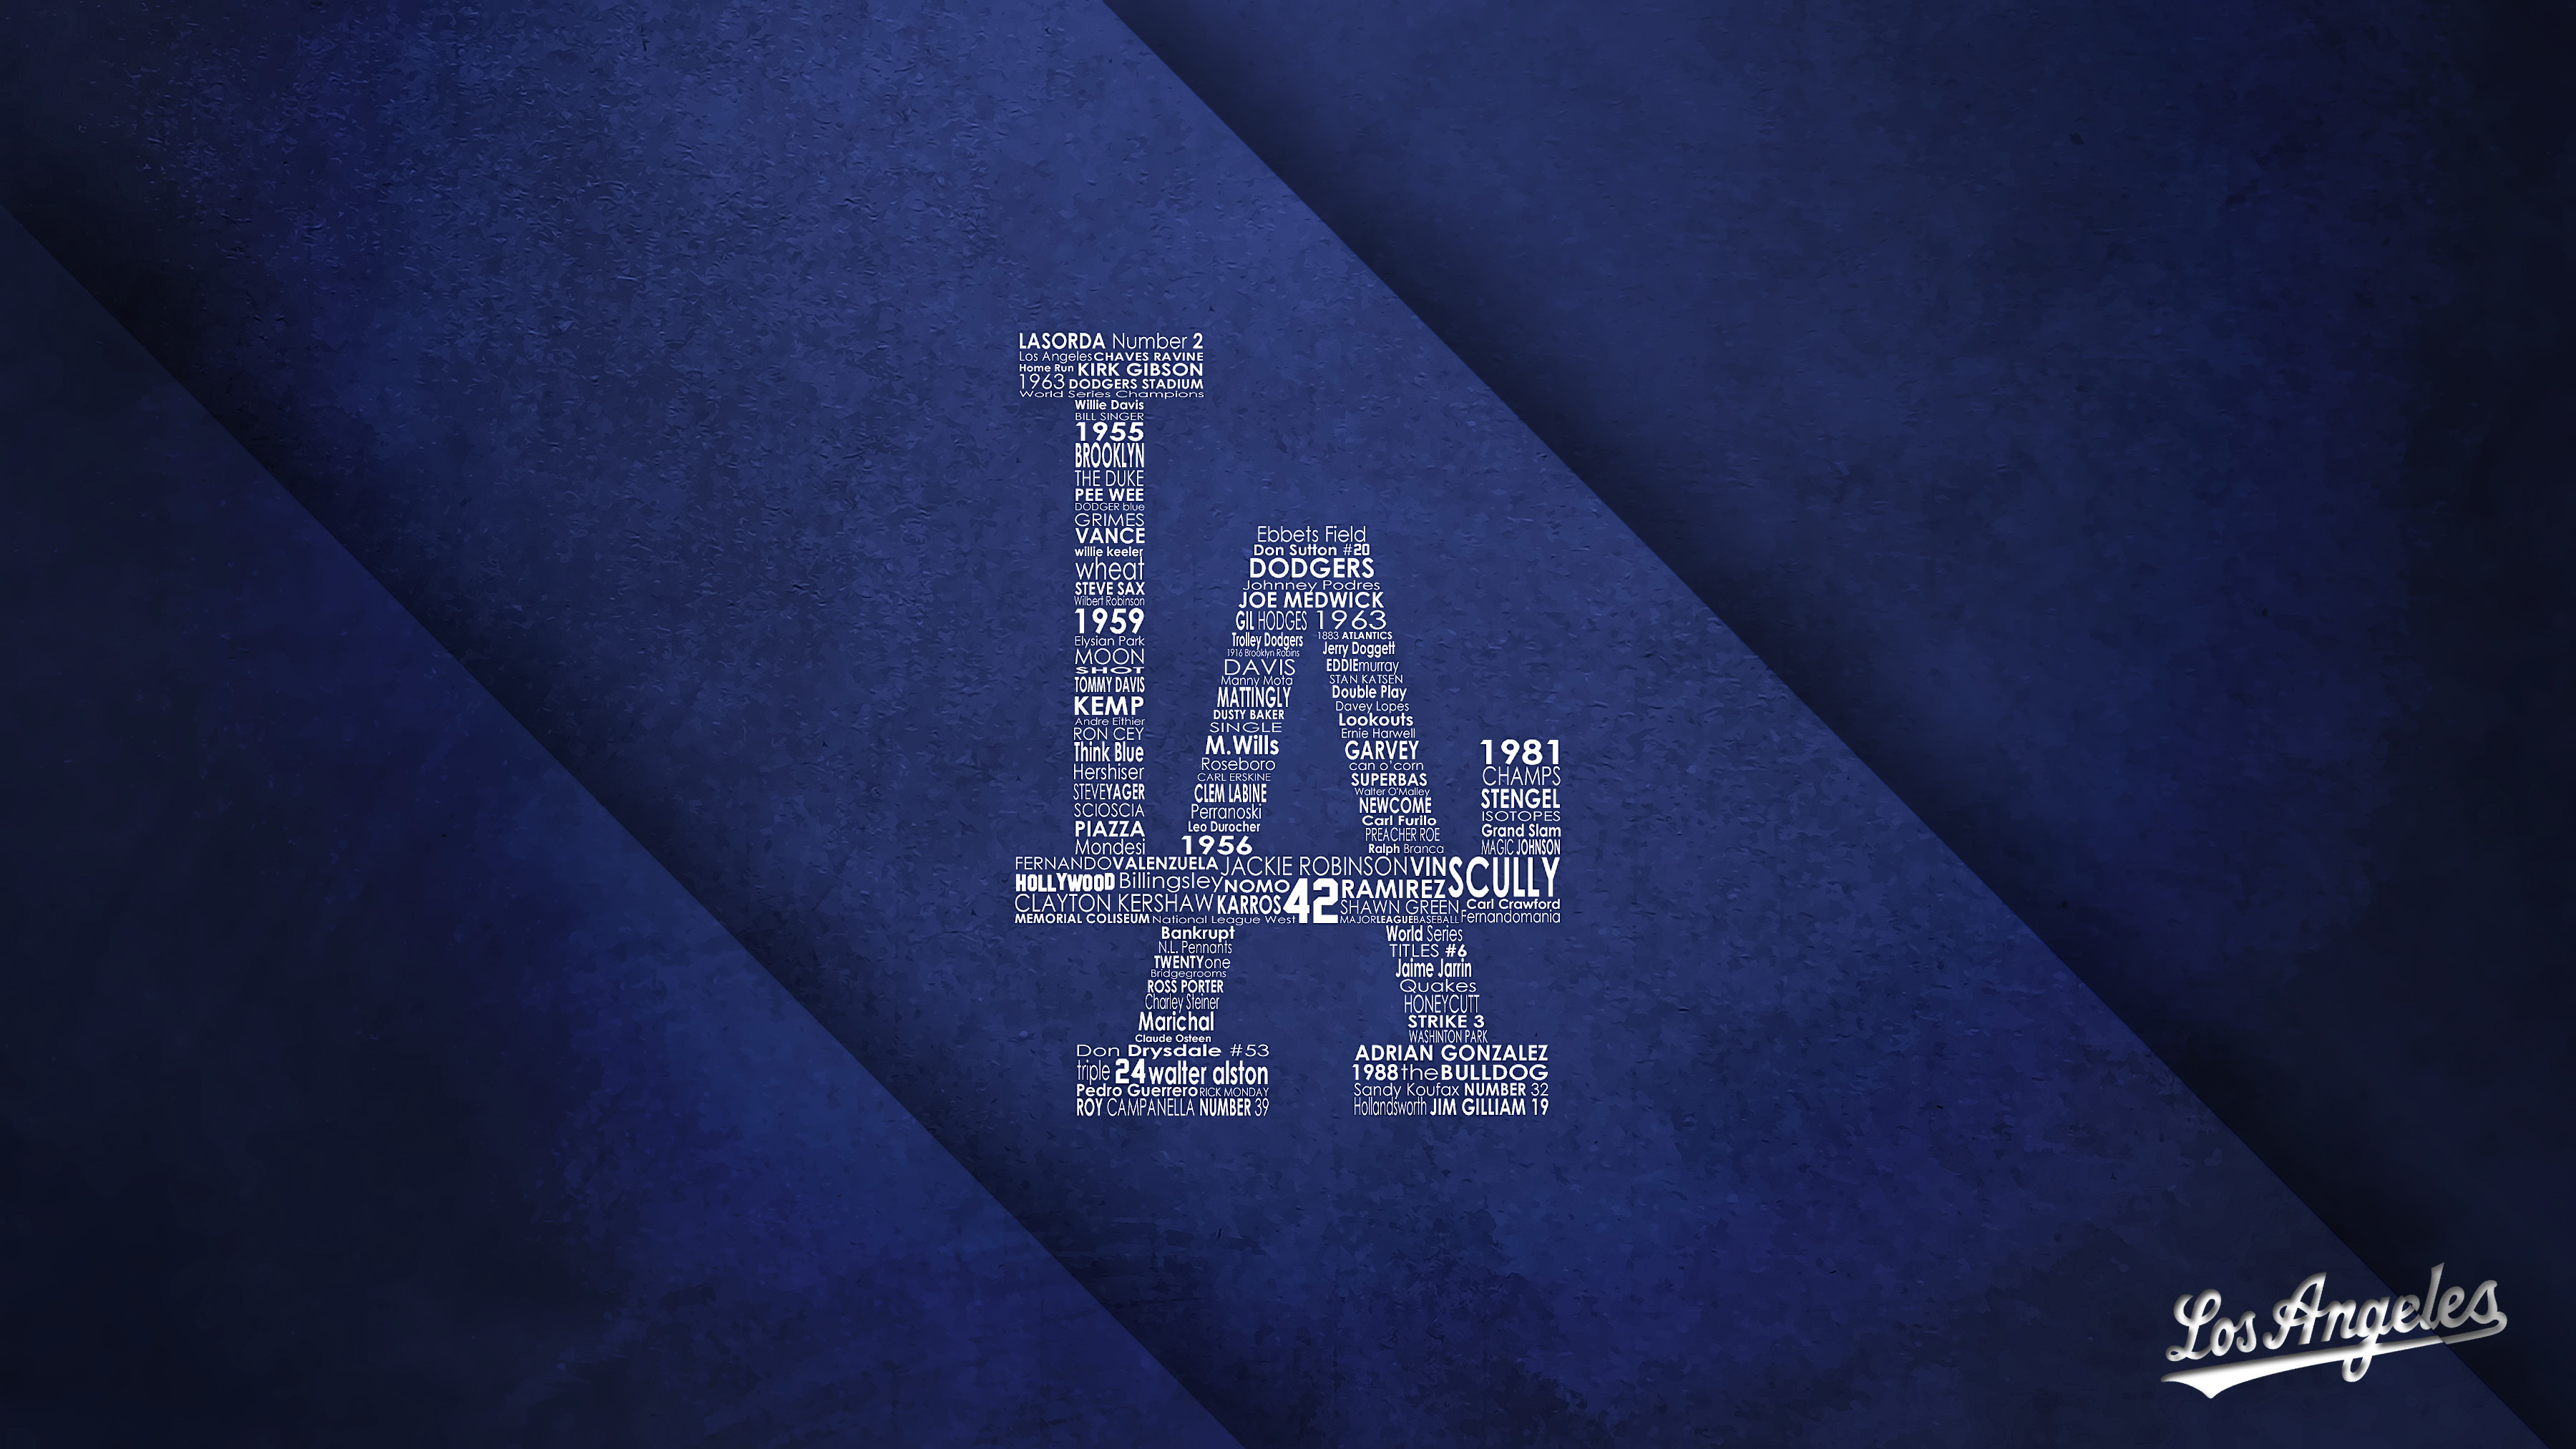 Los Angeles Dodgers Wallpapers  Top 35 Best L A Dodgers Backgrounds  Download